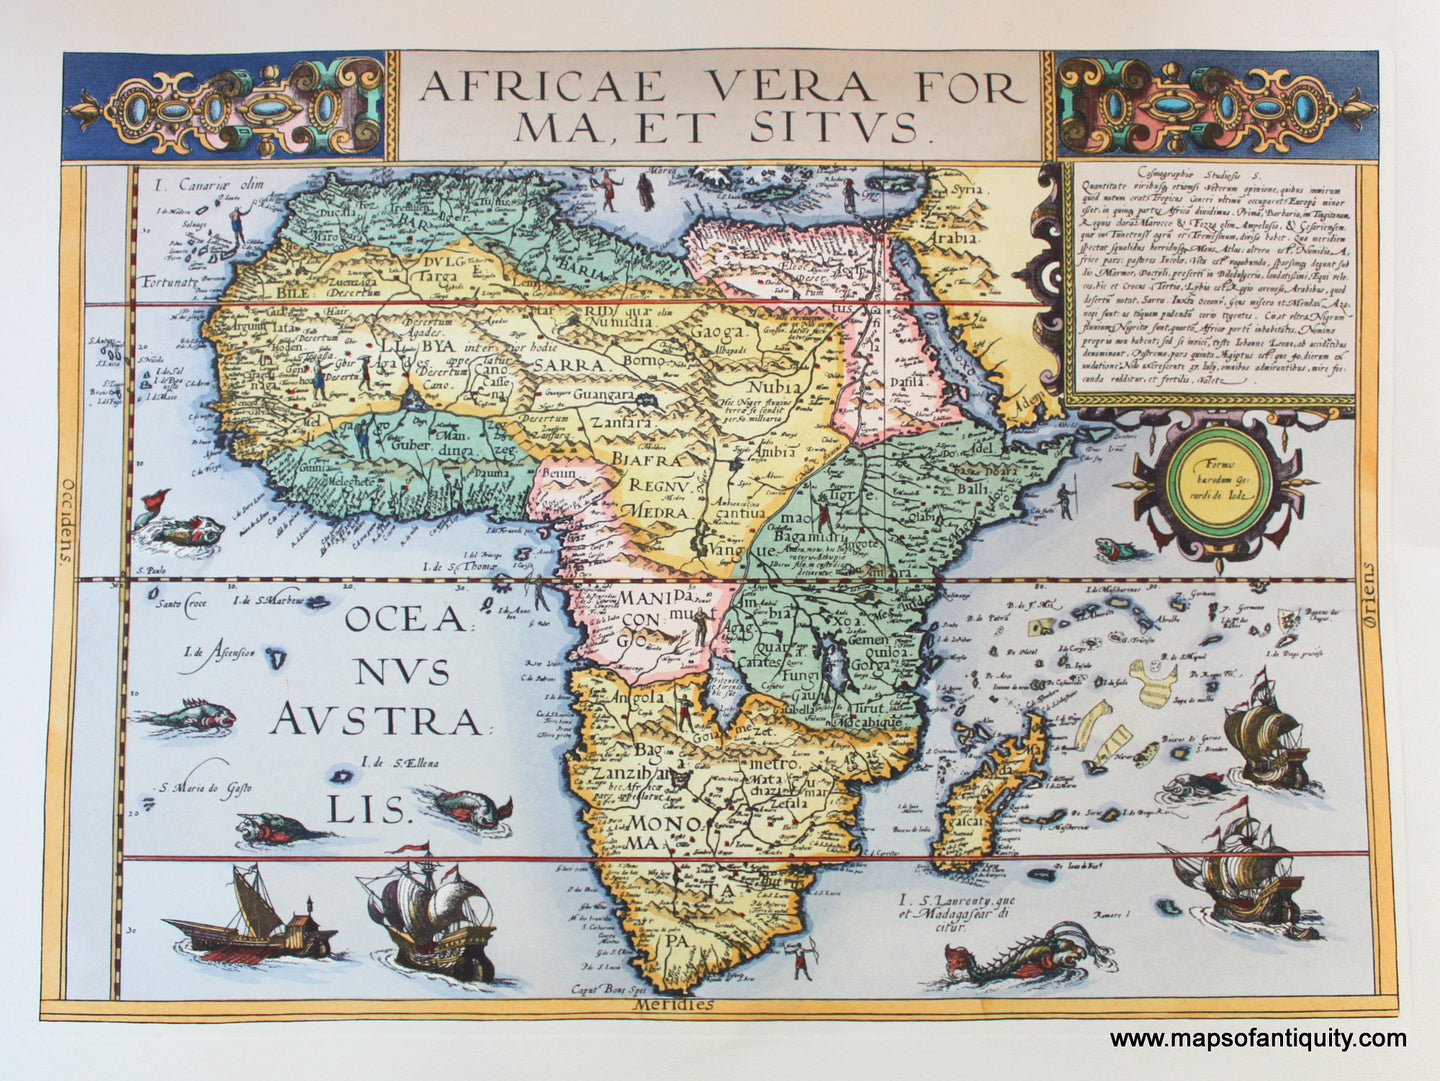 Reproduction-Reproductions-Antique-Map-of-Africa-Africae-Vera-Forma-Et-Situs-de-Jode-Maps-of-Antiquity